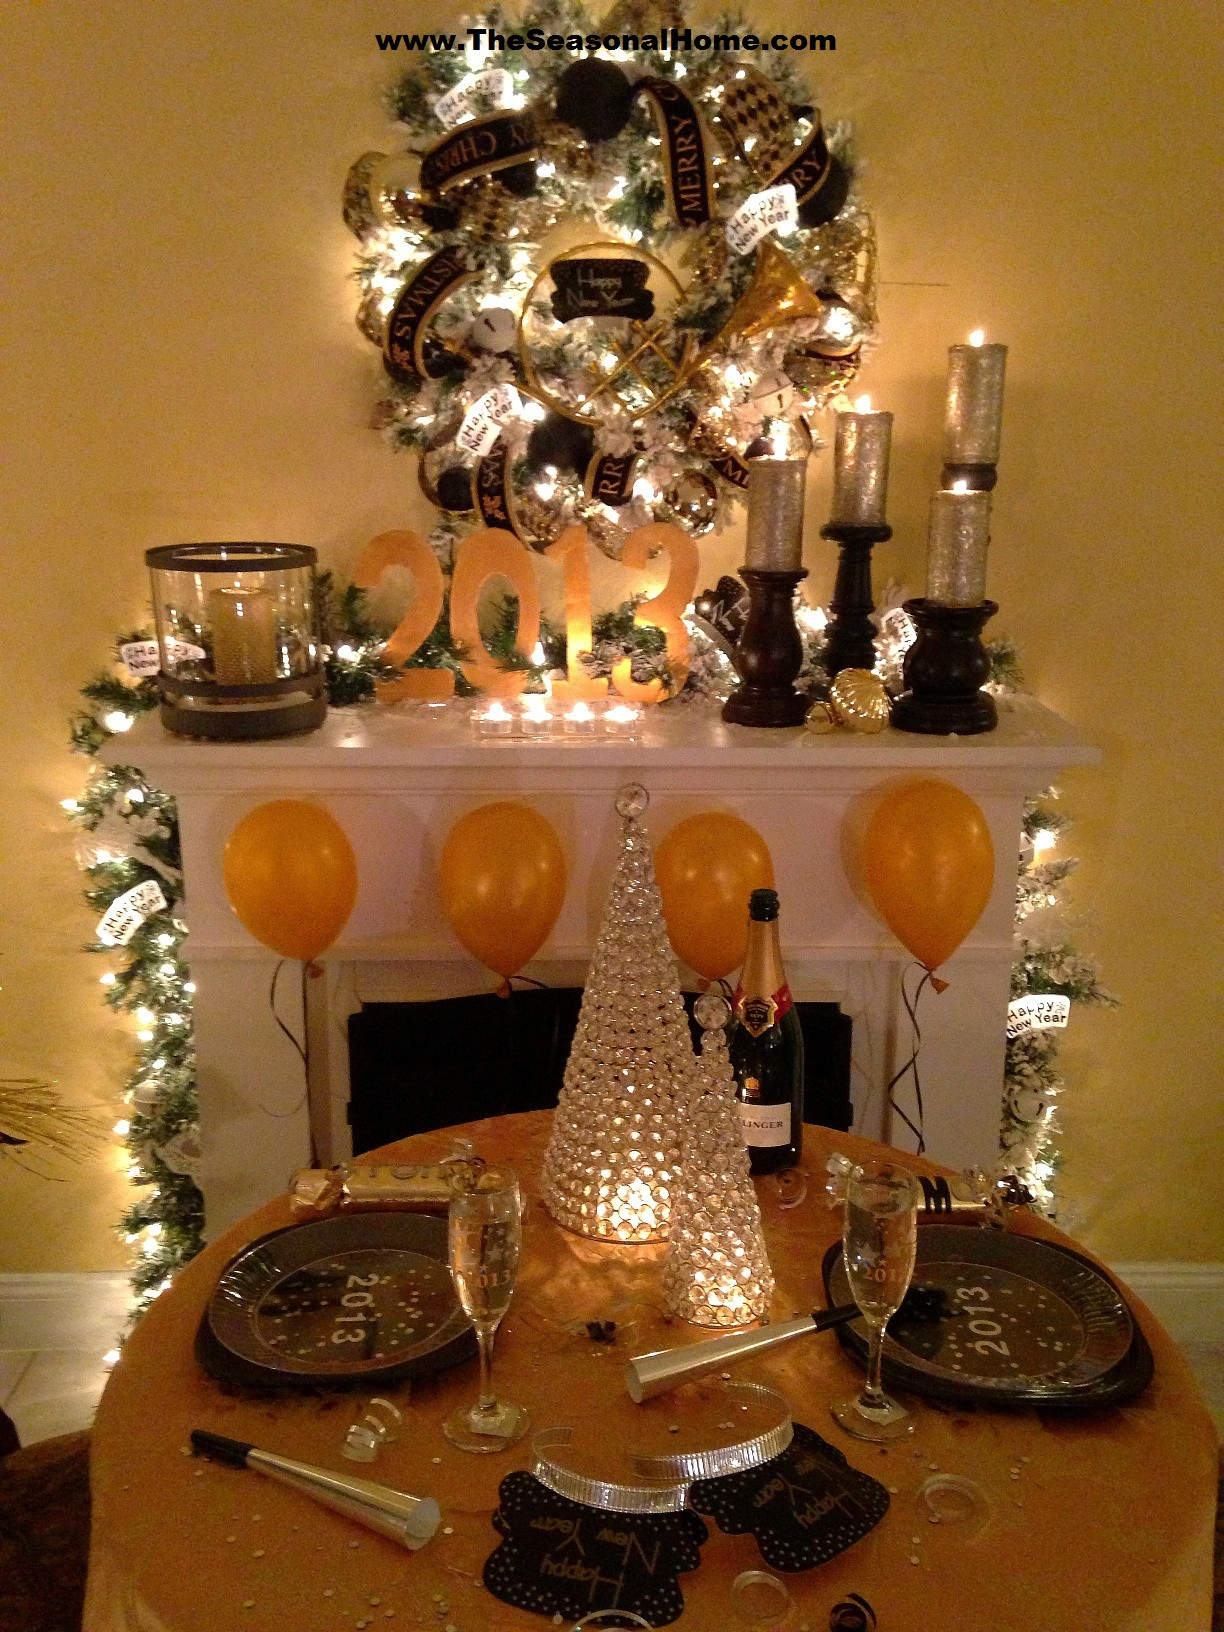 New Year Party Ideas At Home
 Cozy New Year’s Eve Dinner Party at home The Seasonal Home